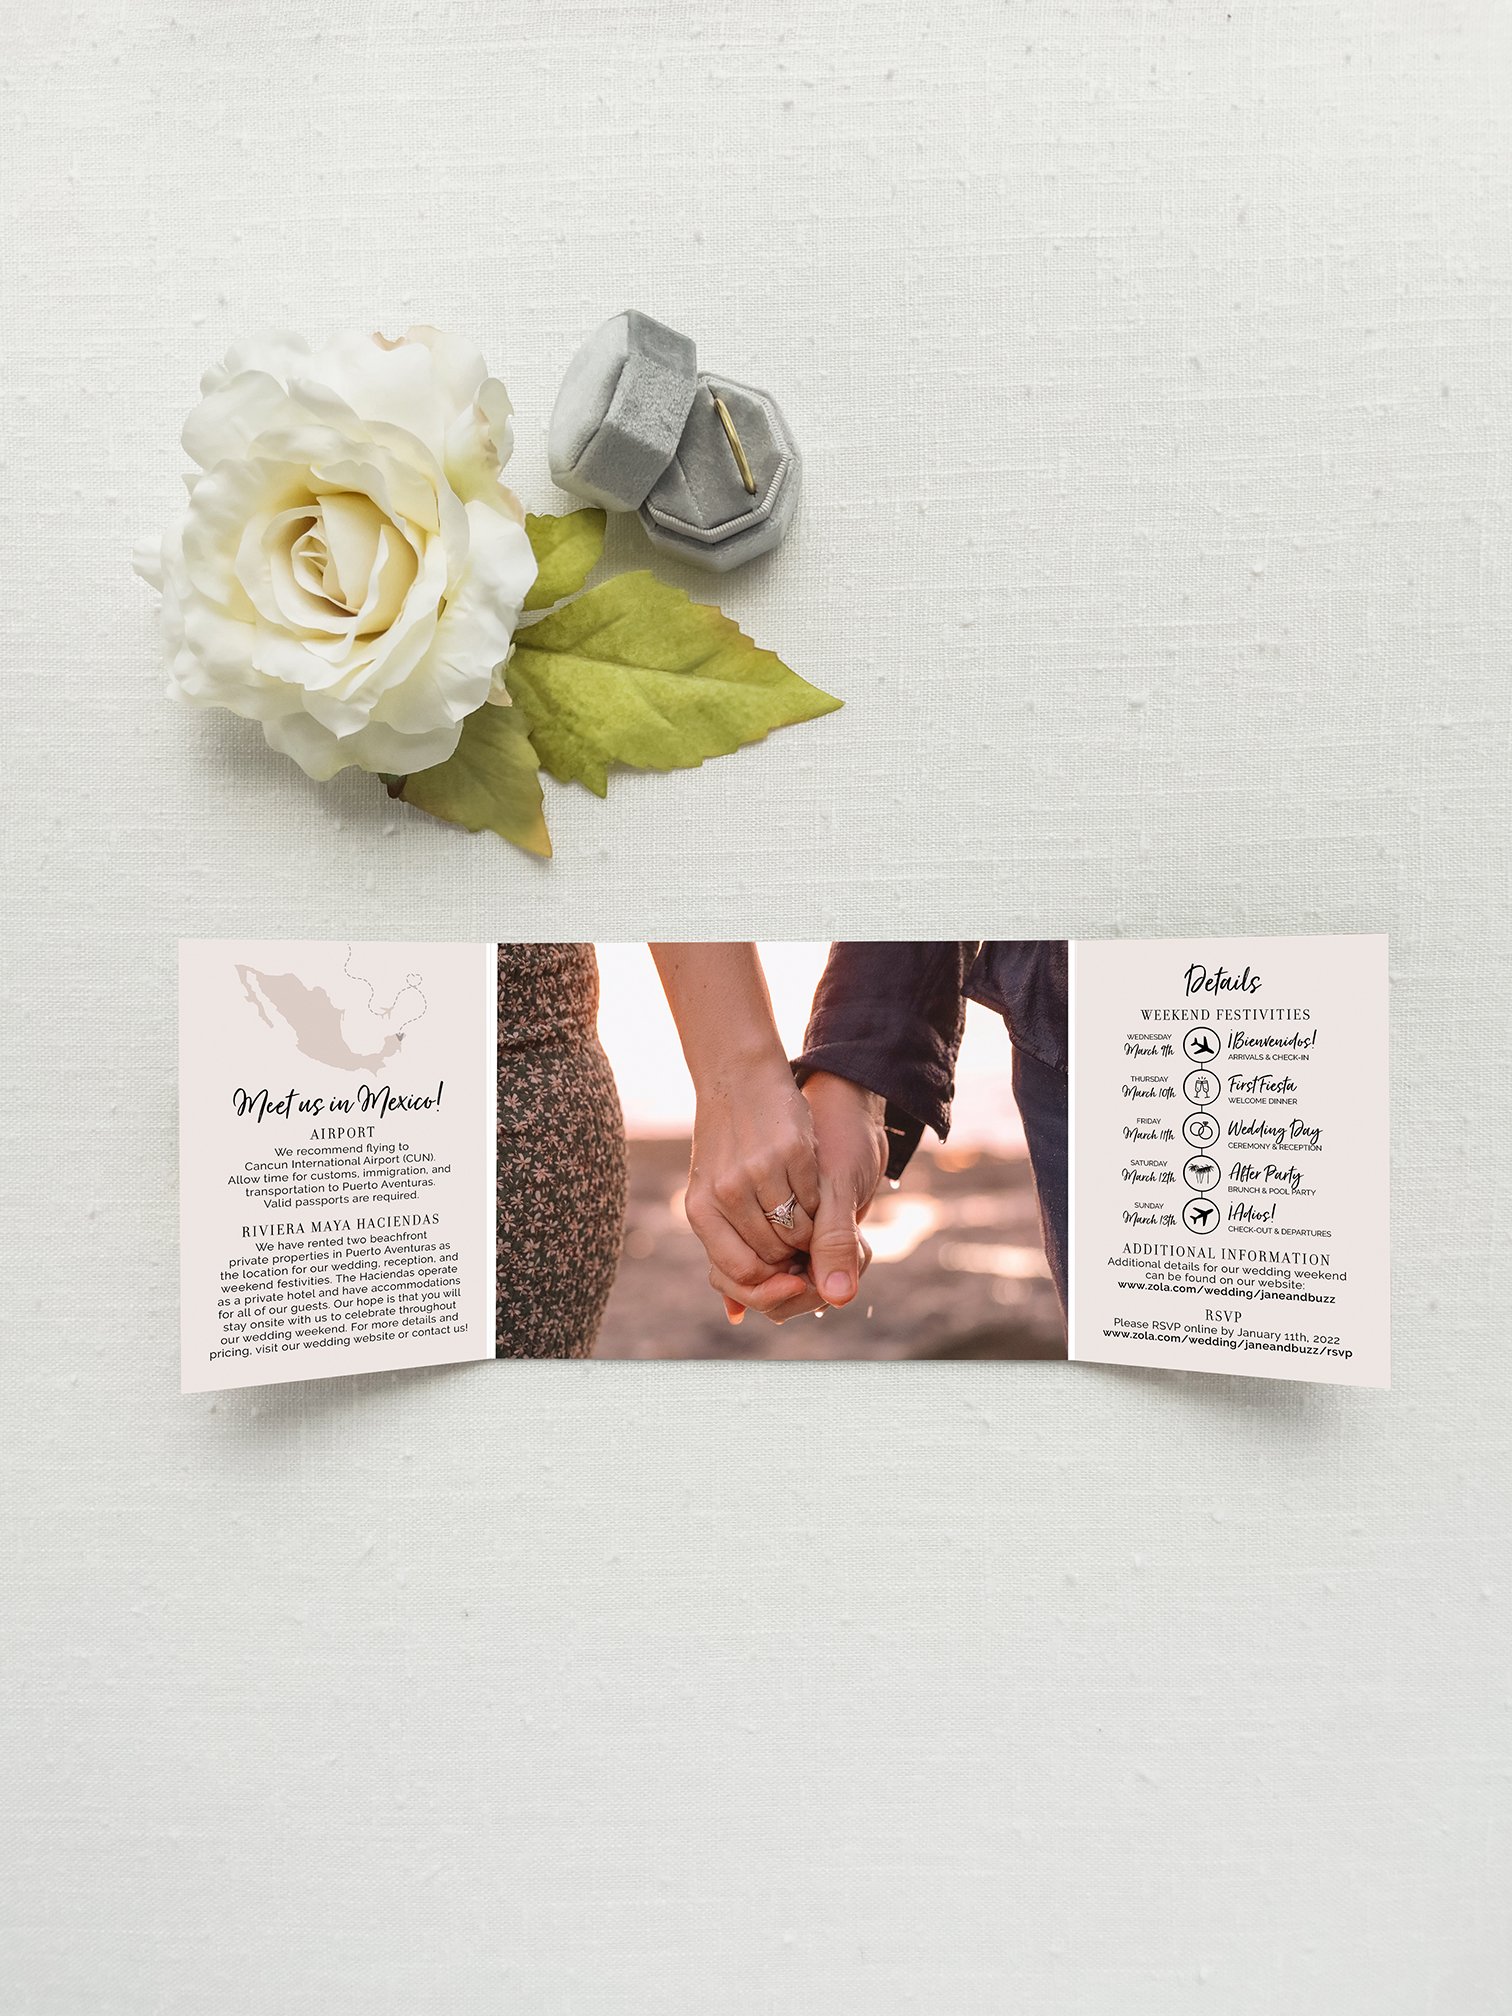 Ring Ceremony Invitation Card With Name Maker Online | Engagement  invitation cards, Engagement card design, Online engagement invitations